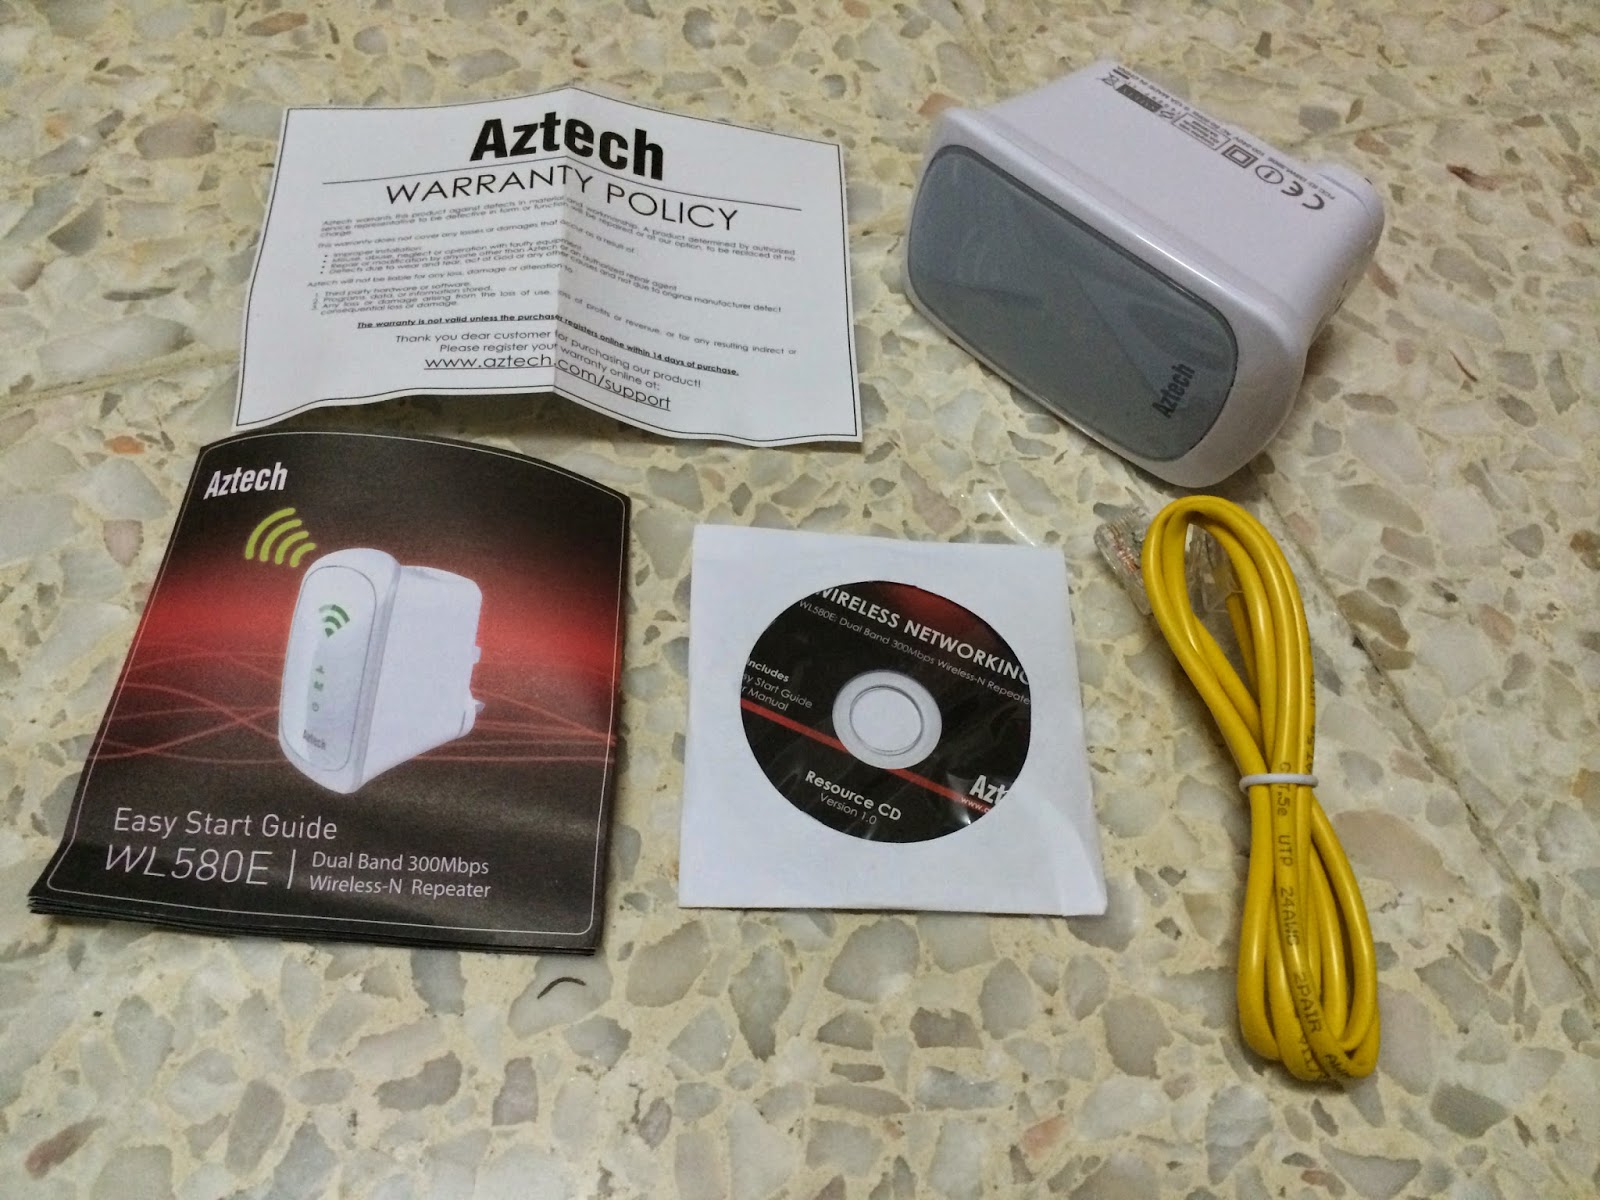 Unboxing & Review: Aztech WL580E Repeater 69